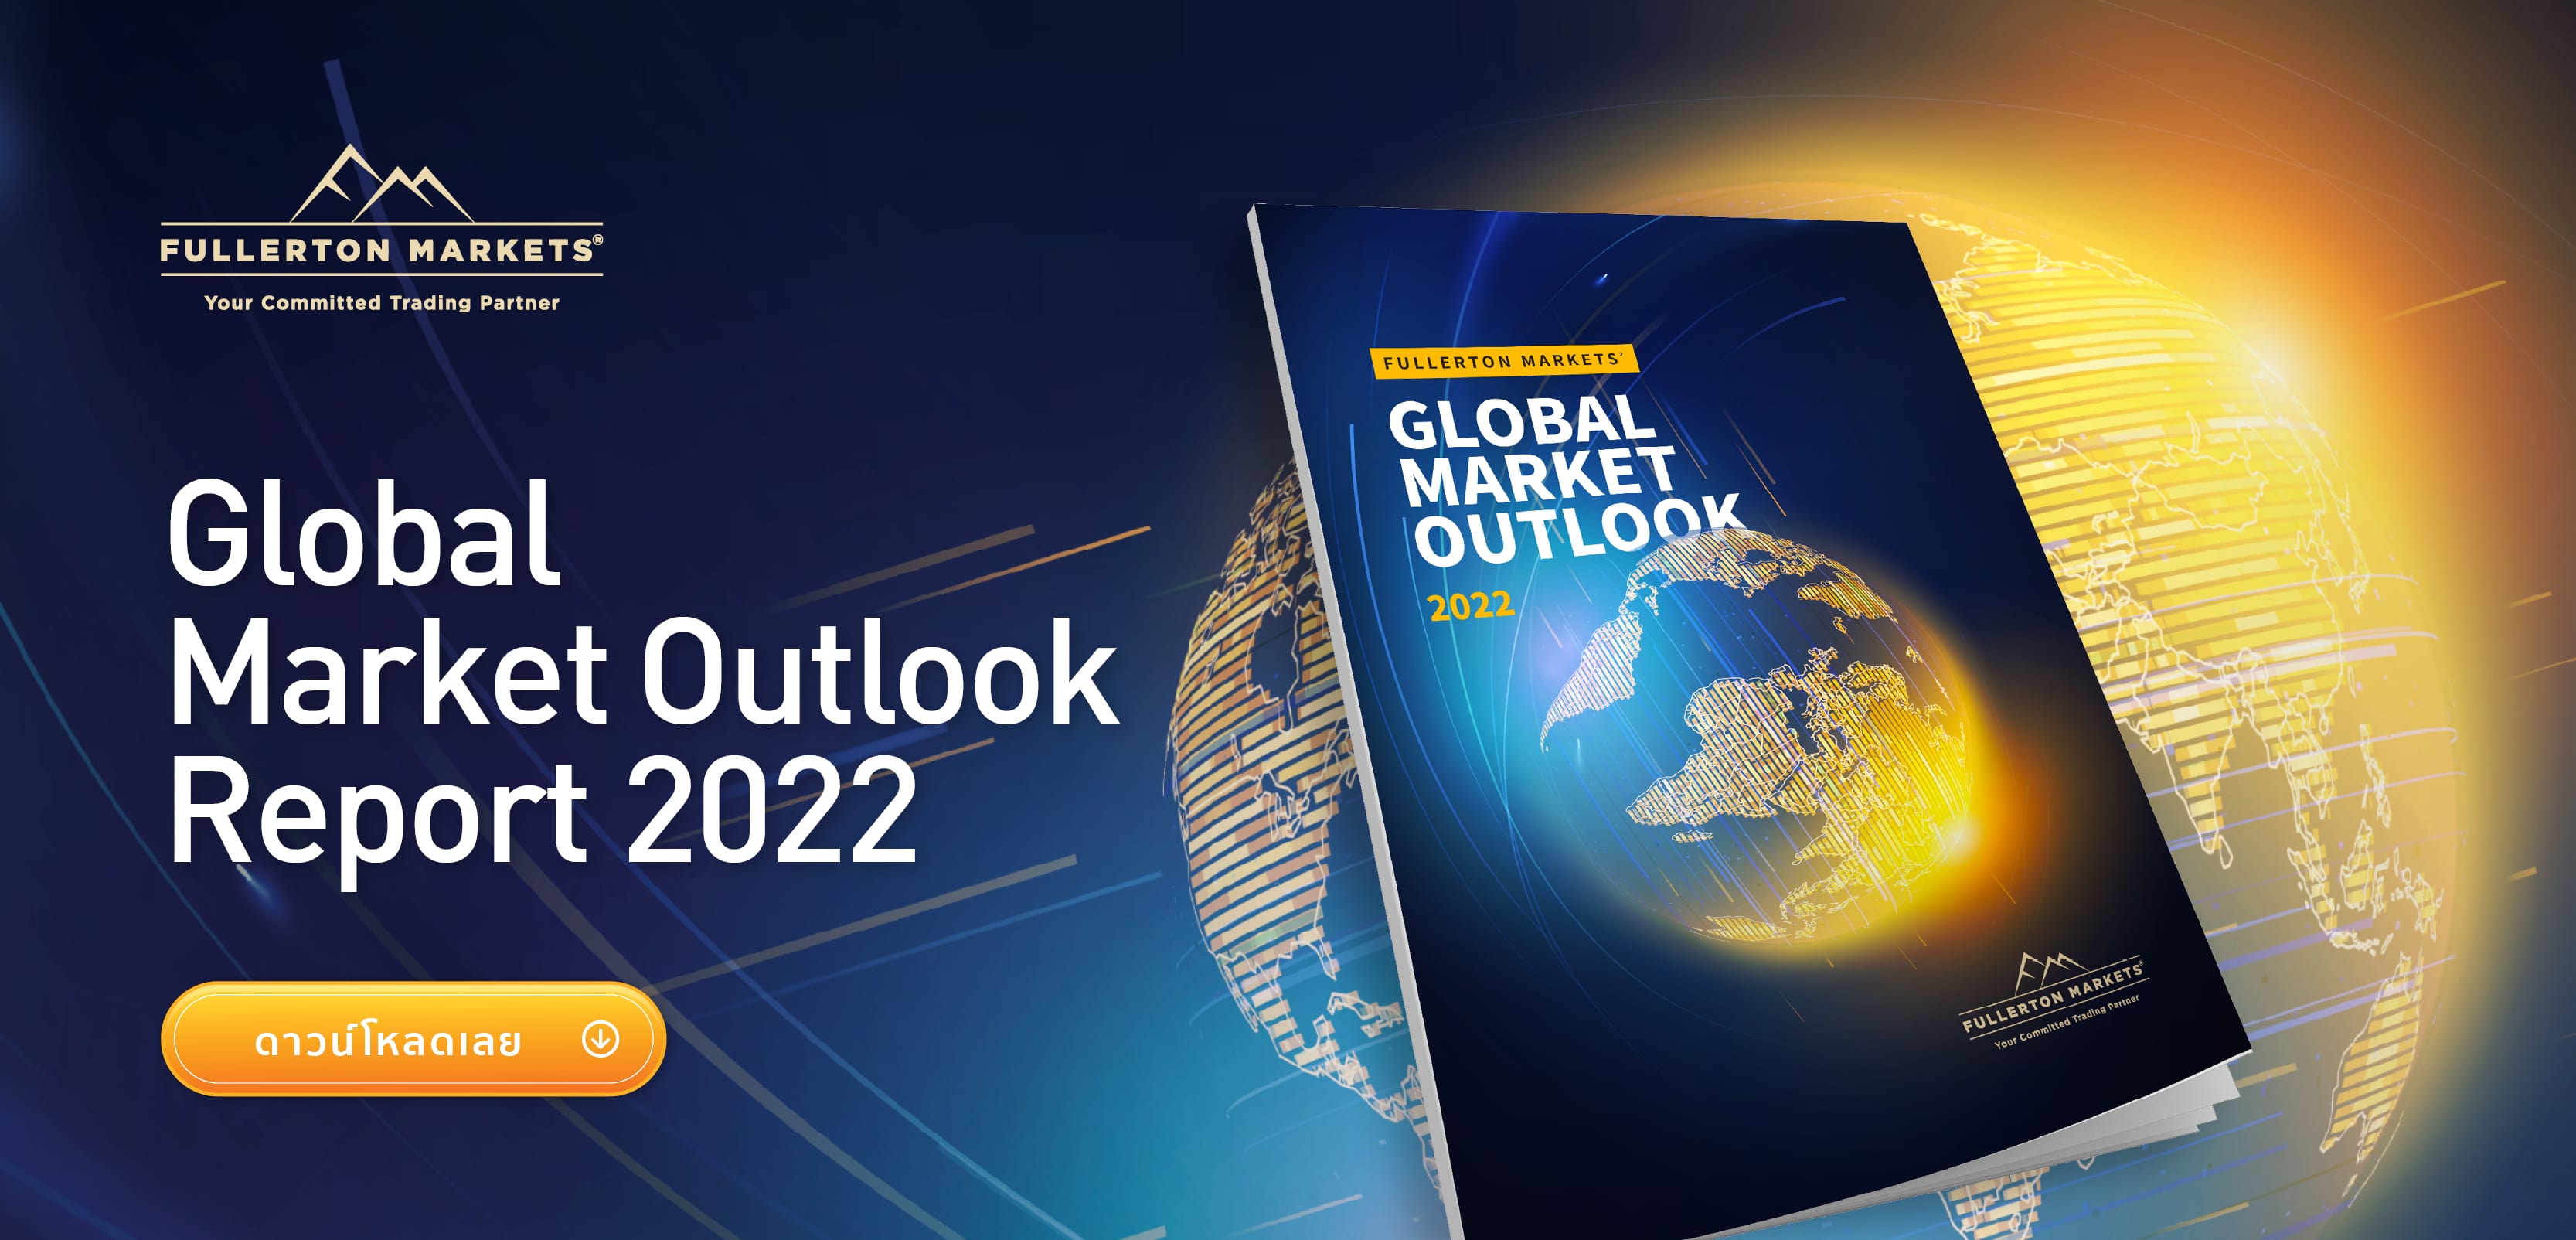 Gold Market Outlook Report 2022_1600x770px_TH